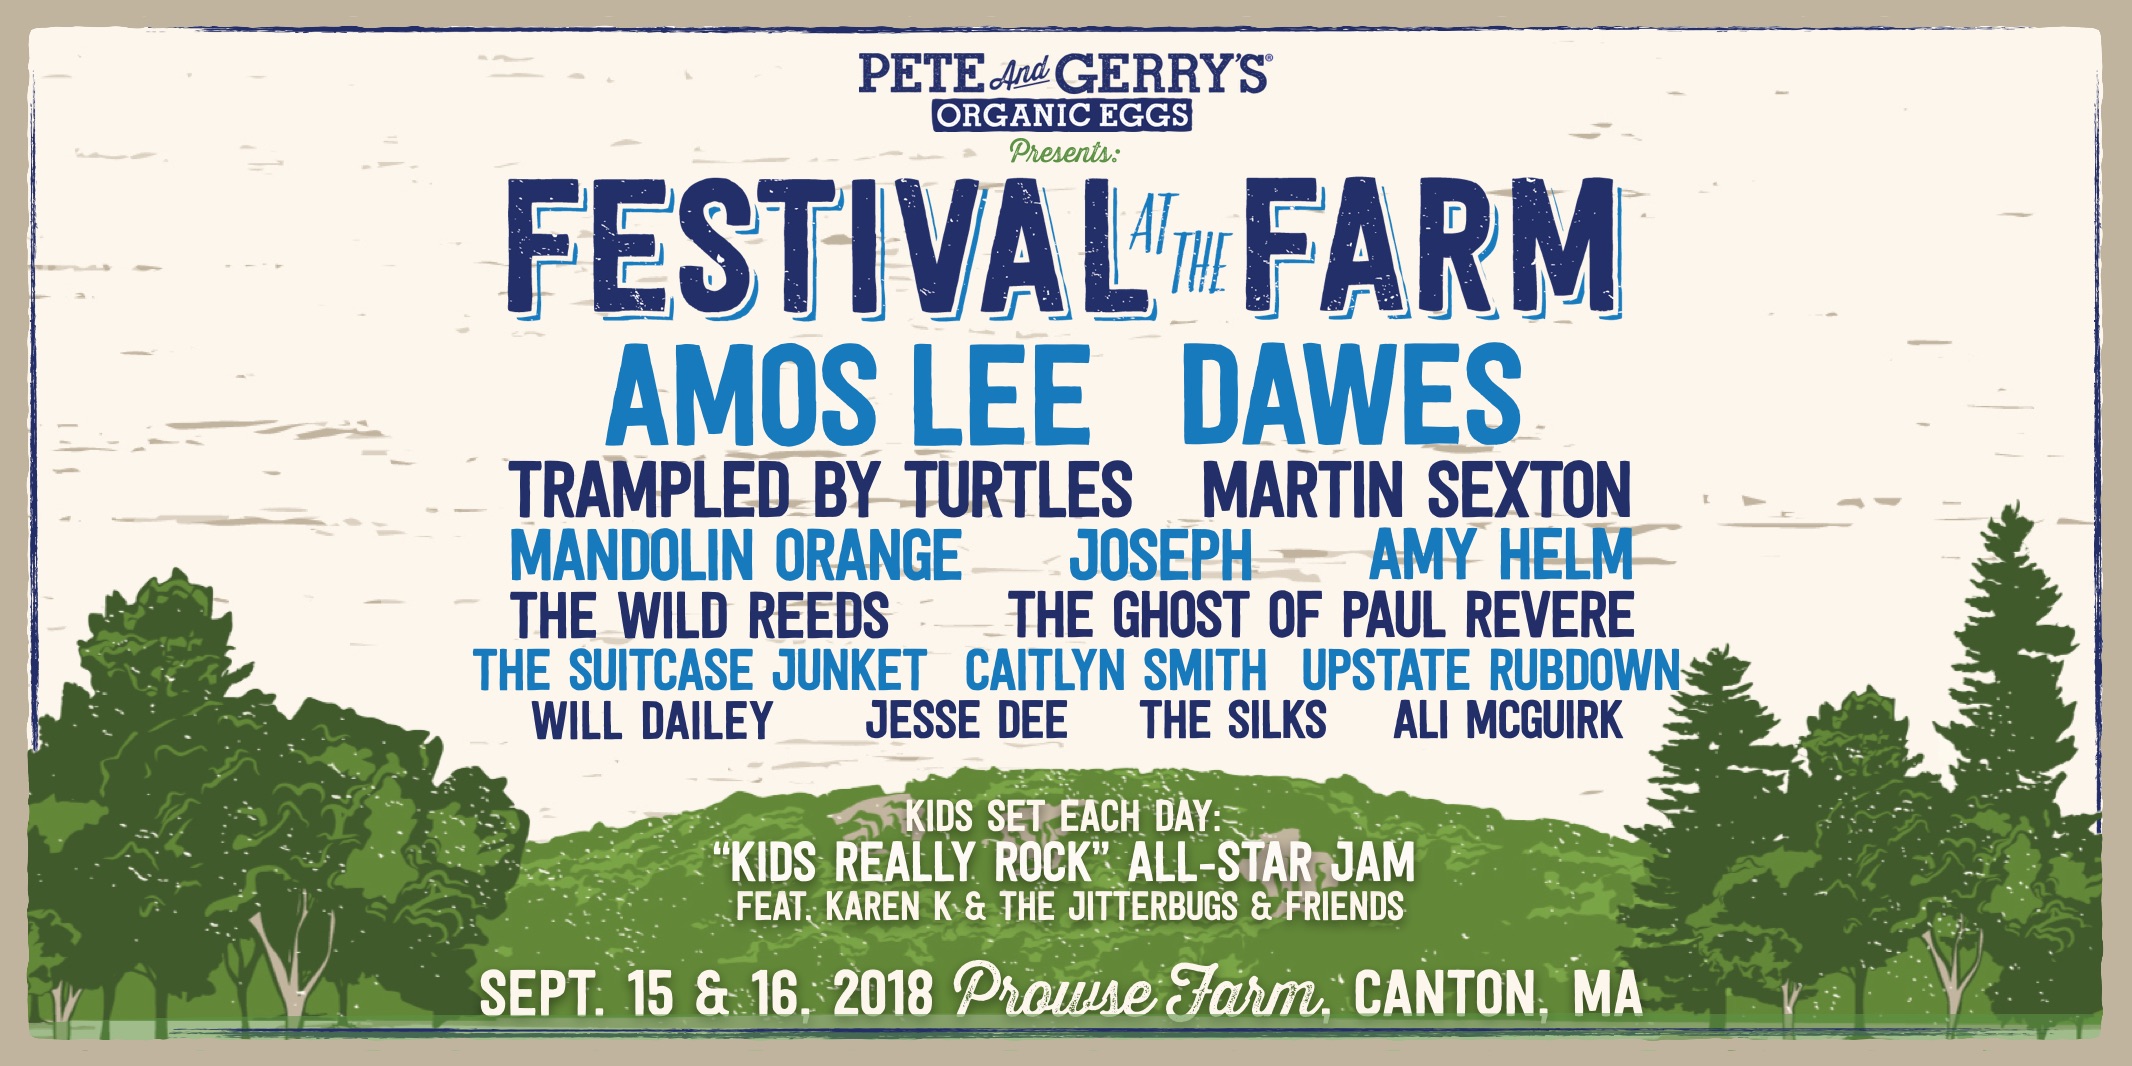 Trampled by Turtles, Martin Sexton and more added to 2018 Festival at the Farm